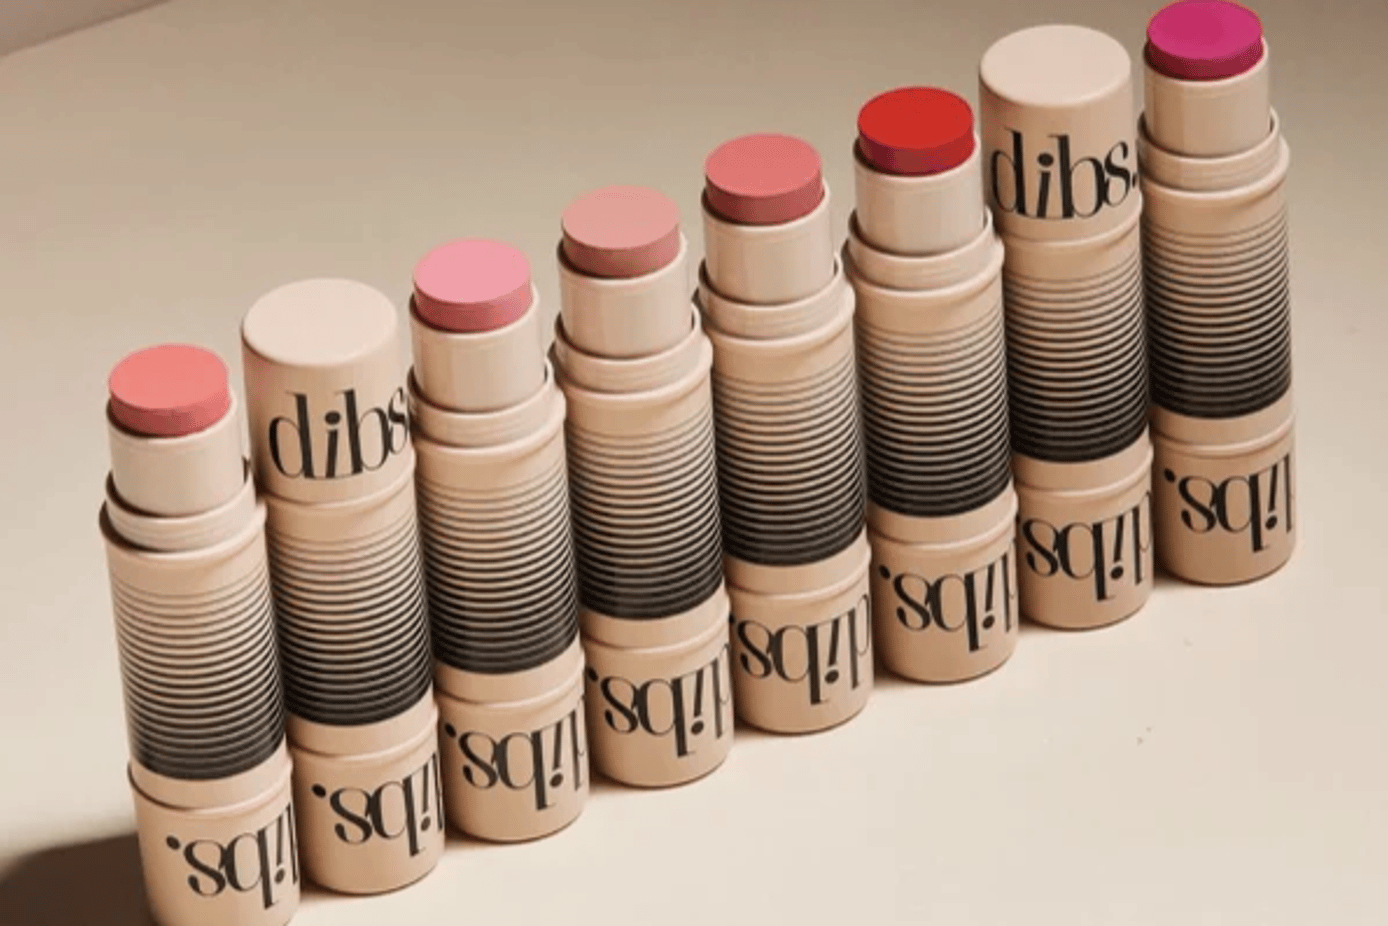 Dibs Beauty receives investment from L Catterton